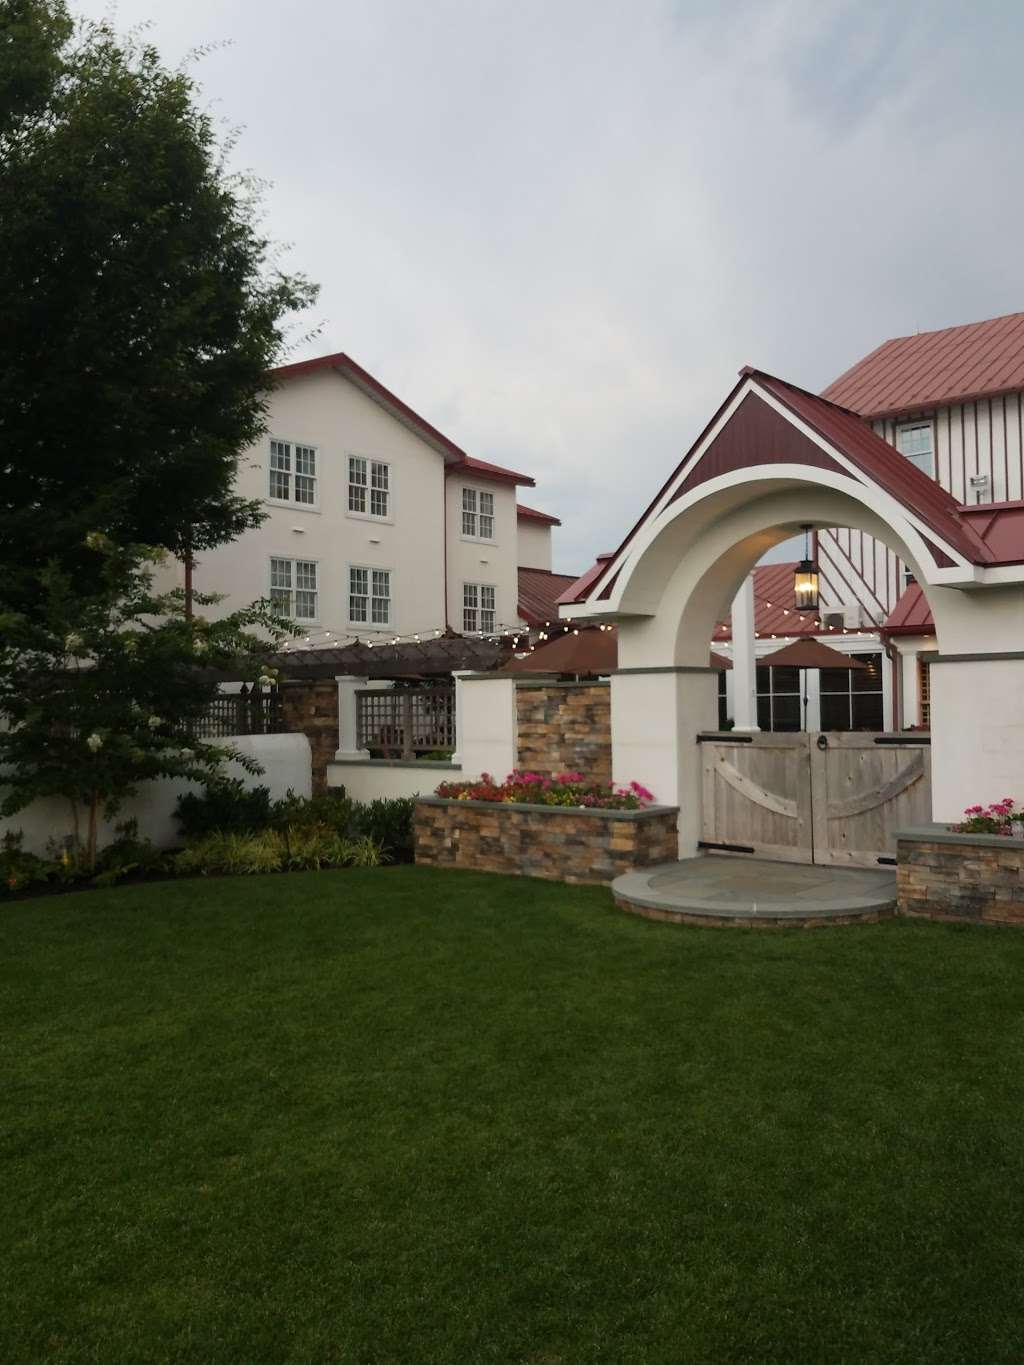 Normandy Farm Hotel and Conference Center | 1401 Morris Rd, Blue Bell, PA 19422 | Phone: (215) 616-8500